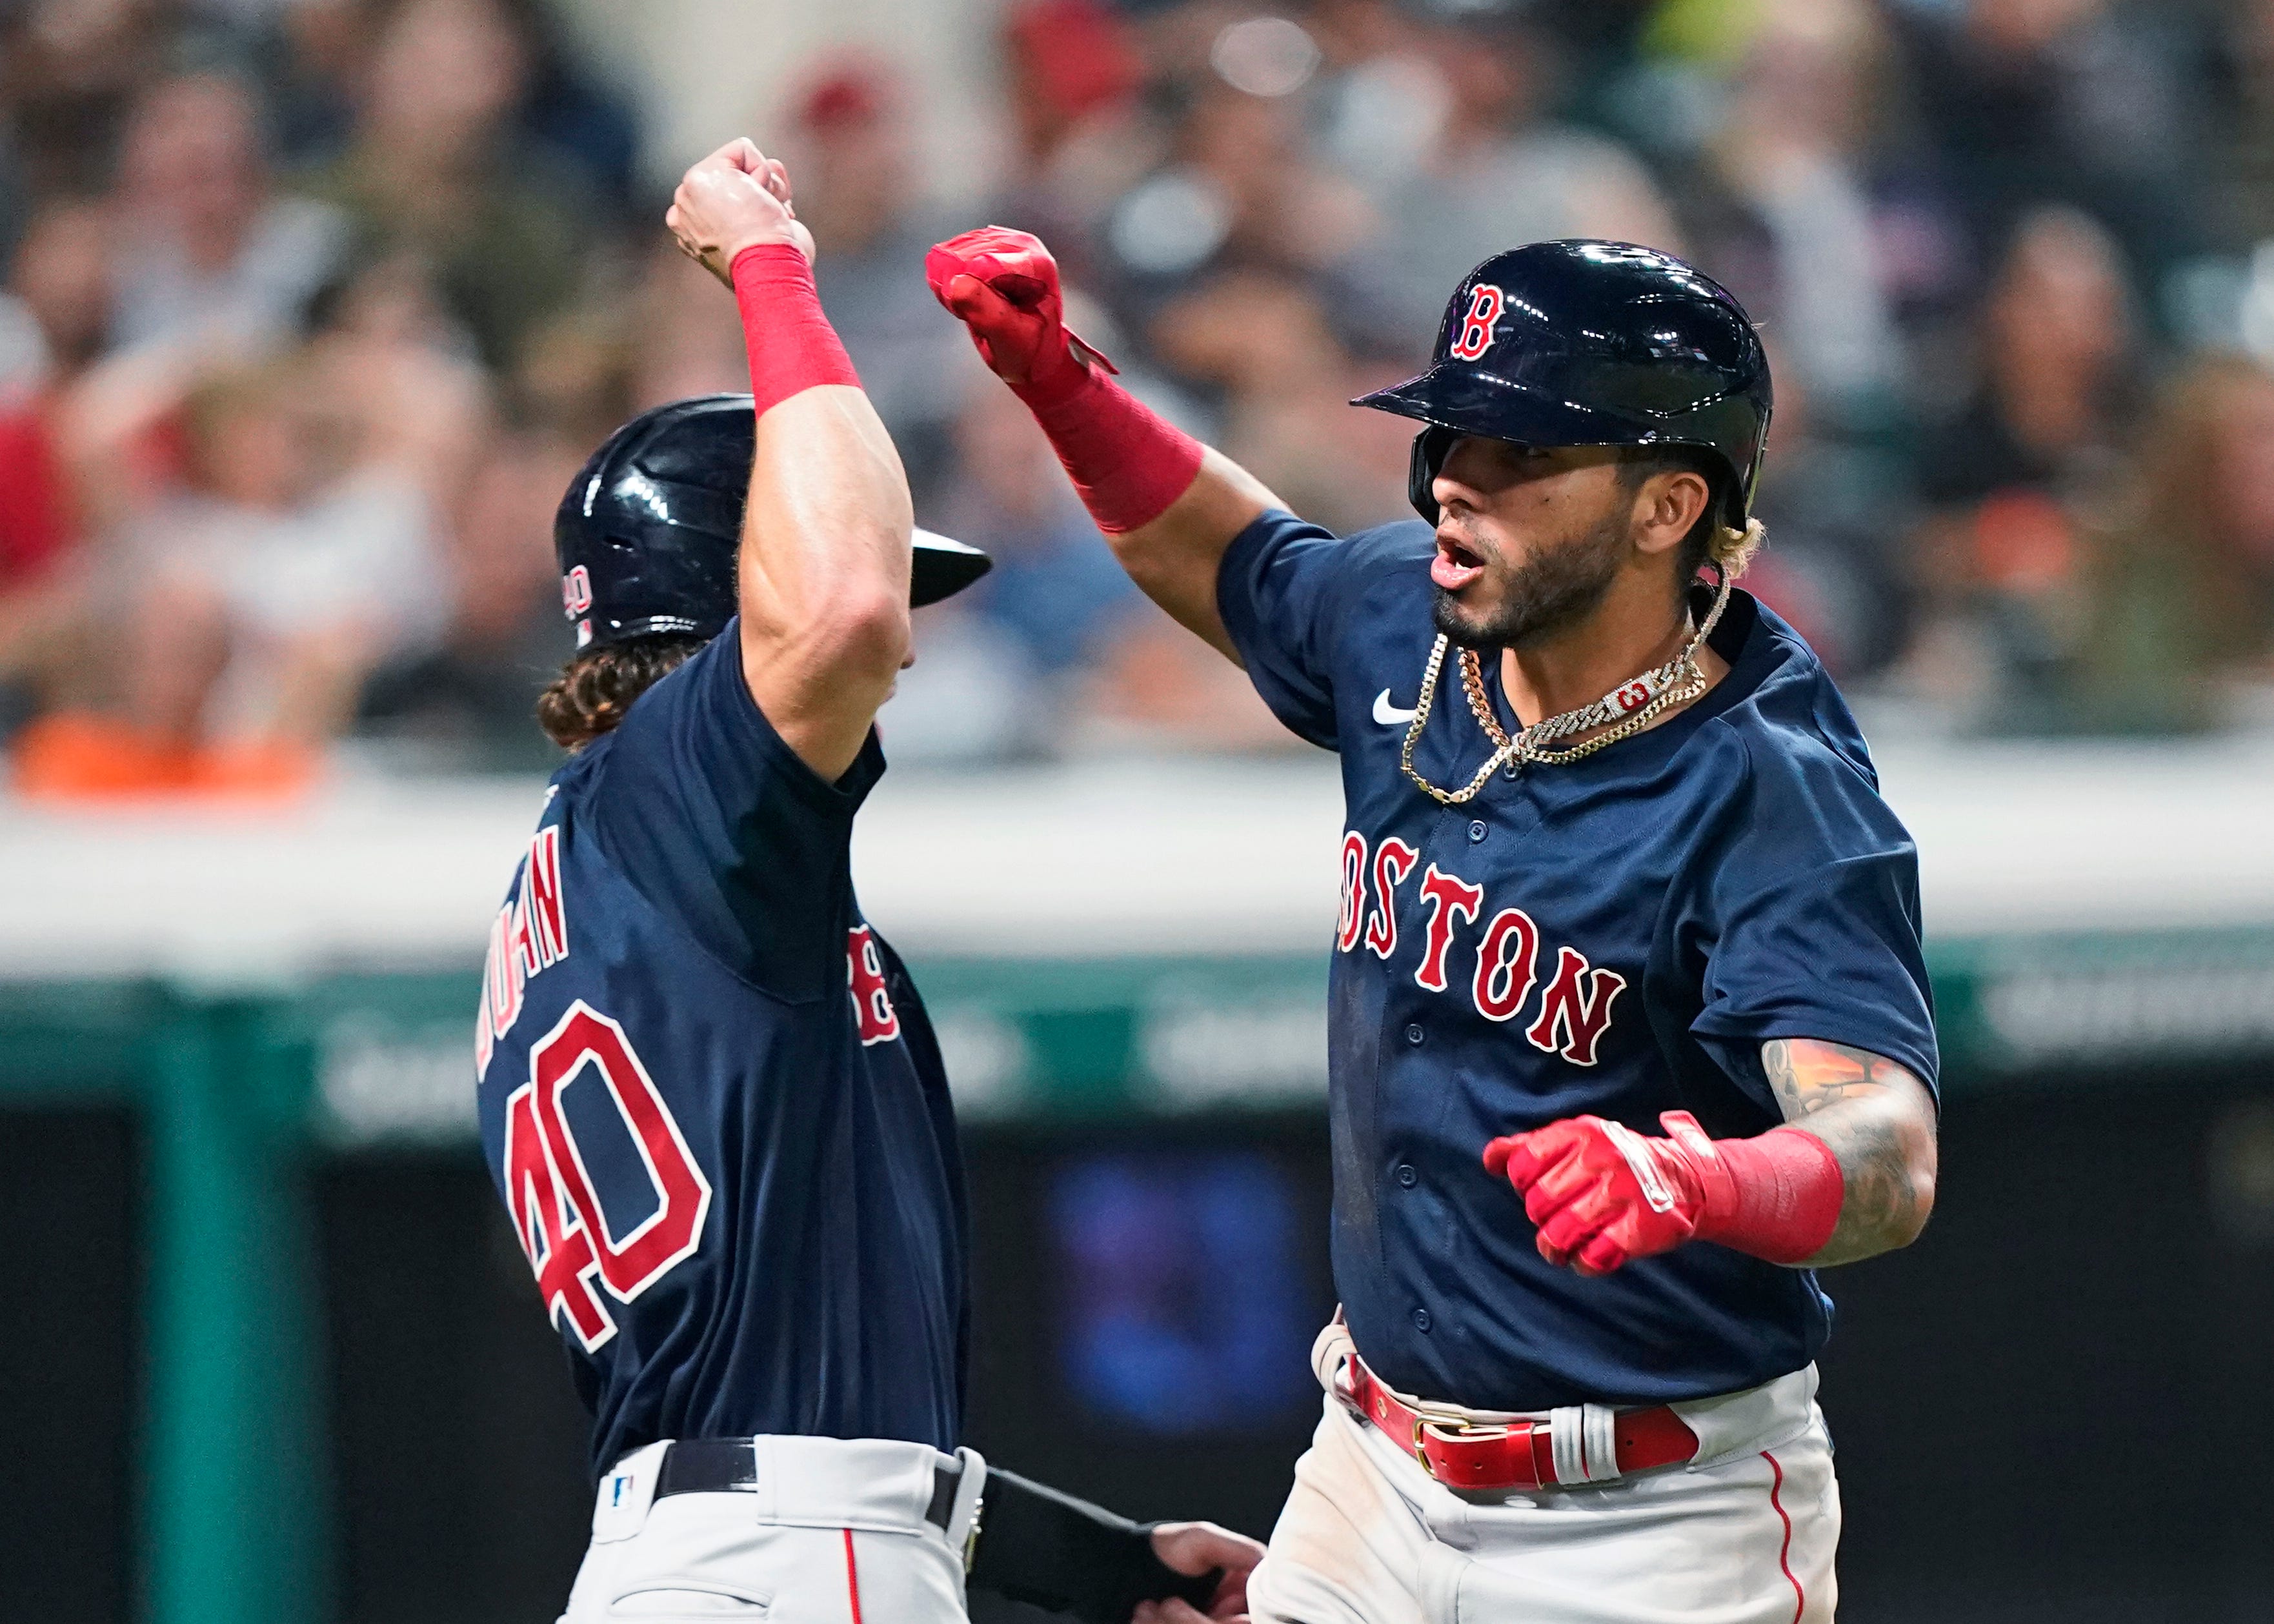 Do the Cubs stand a chance against a hot Red Sox team? | On Site